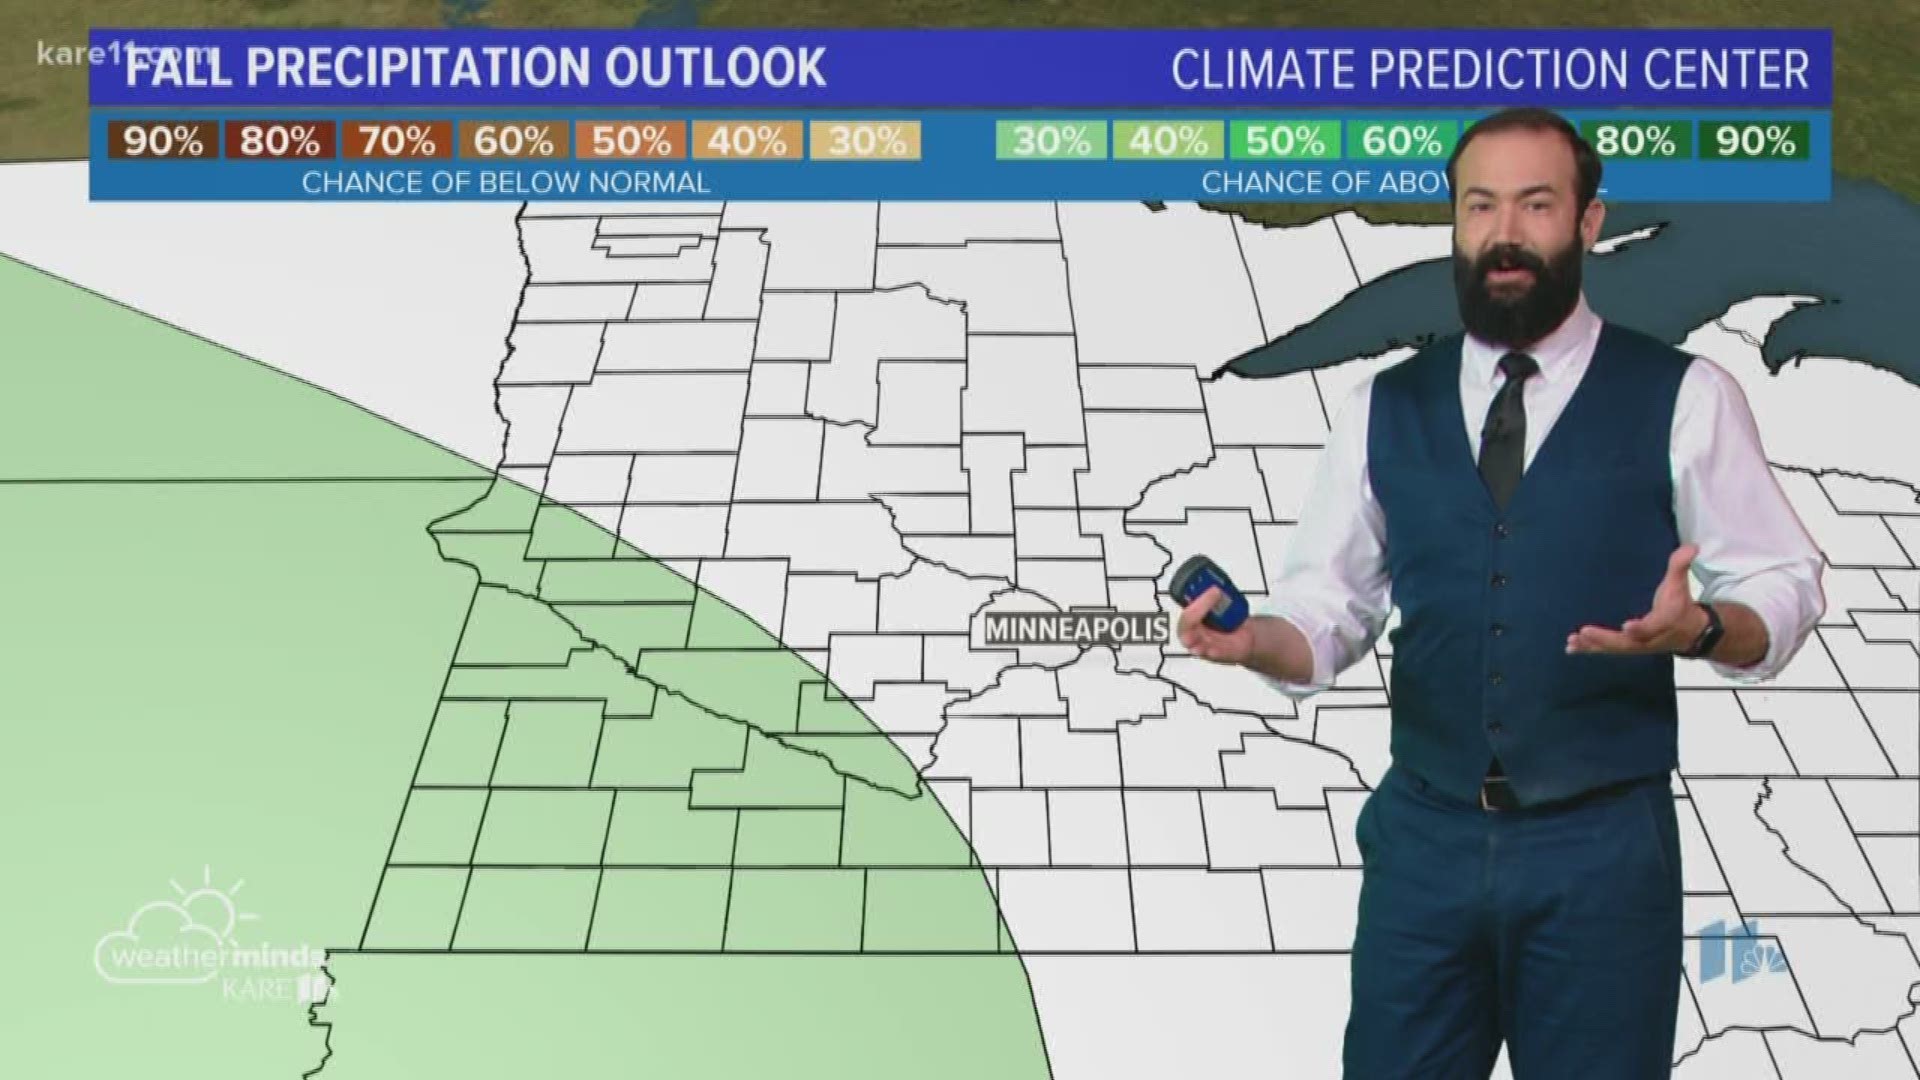 JD gives us an outlook of fall weather